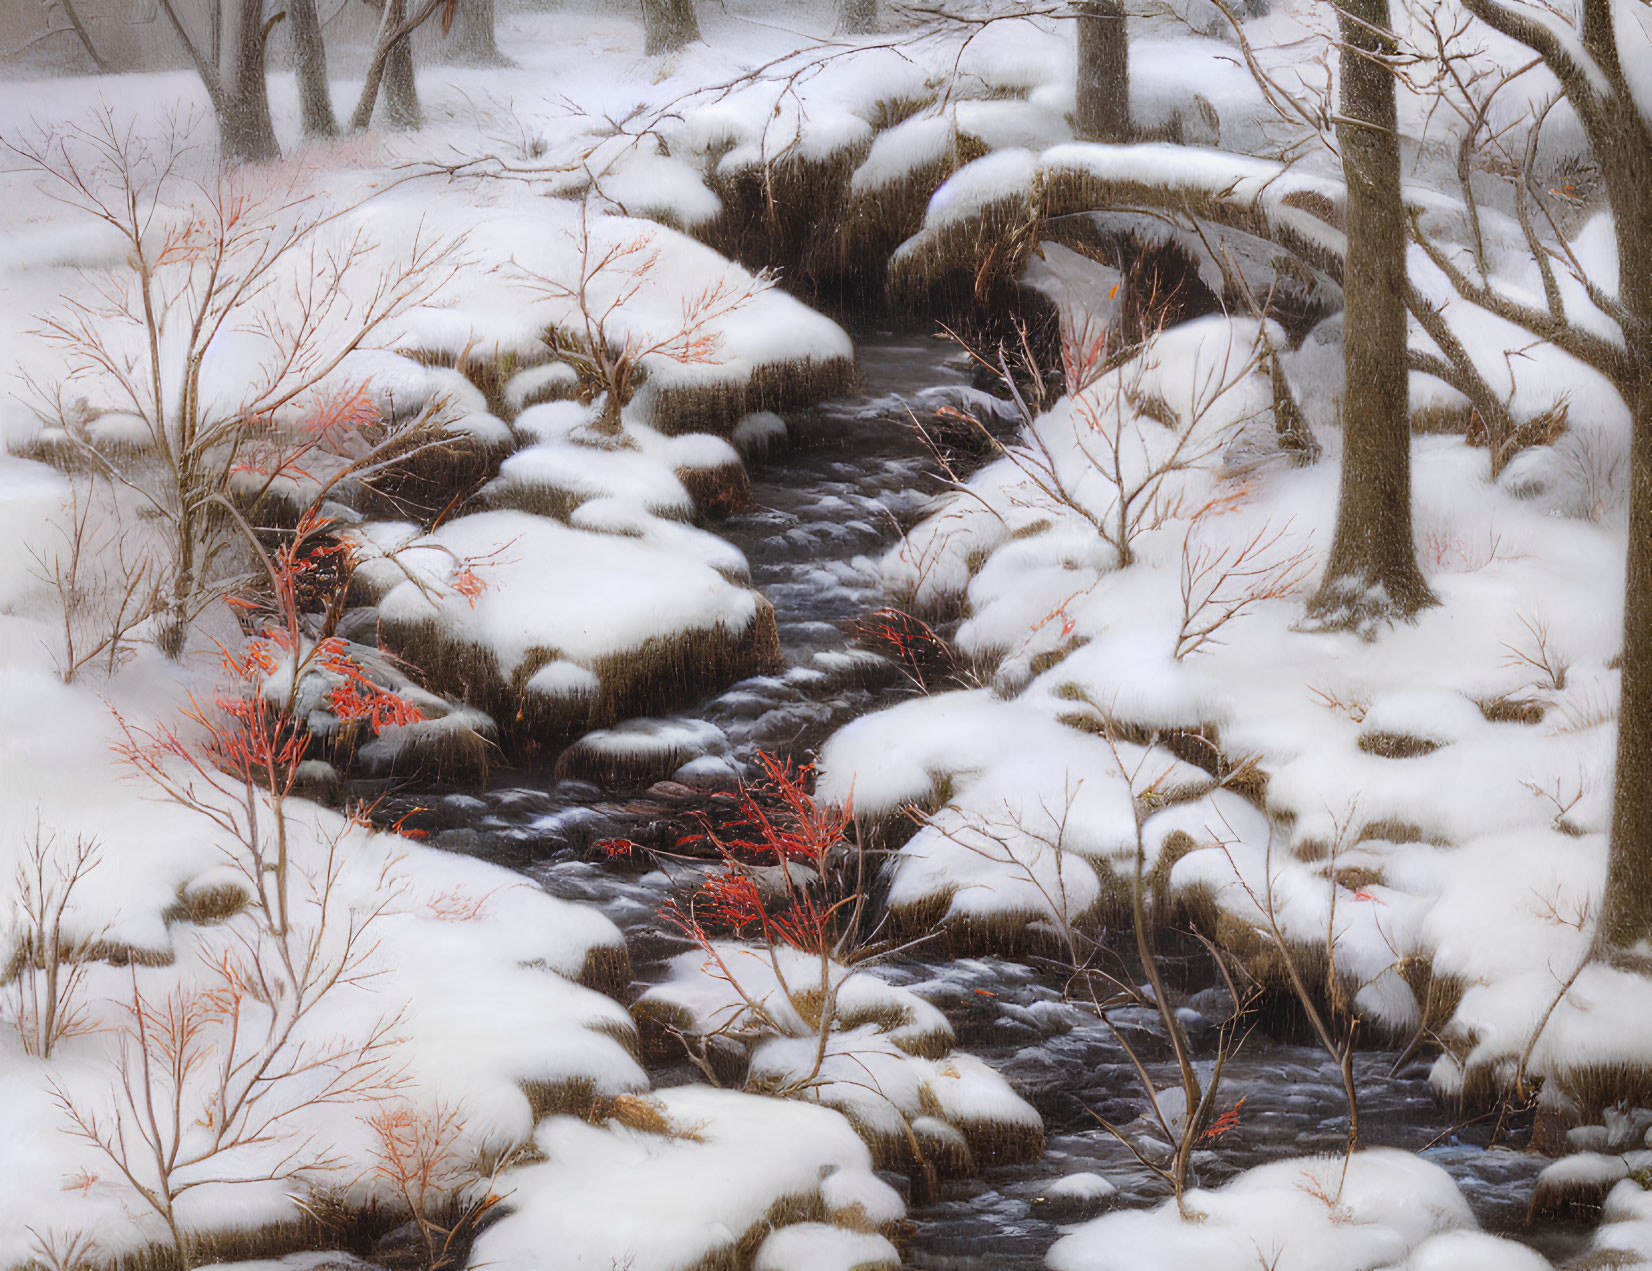 Snow-covered landscape with meandering stream and red-leafed bushes